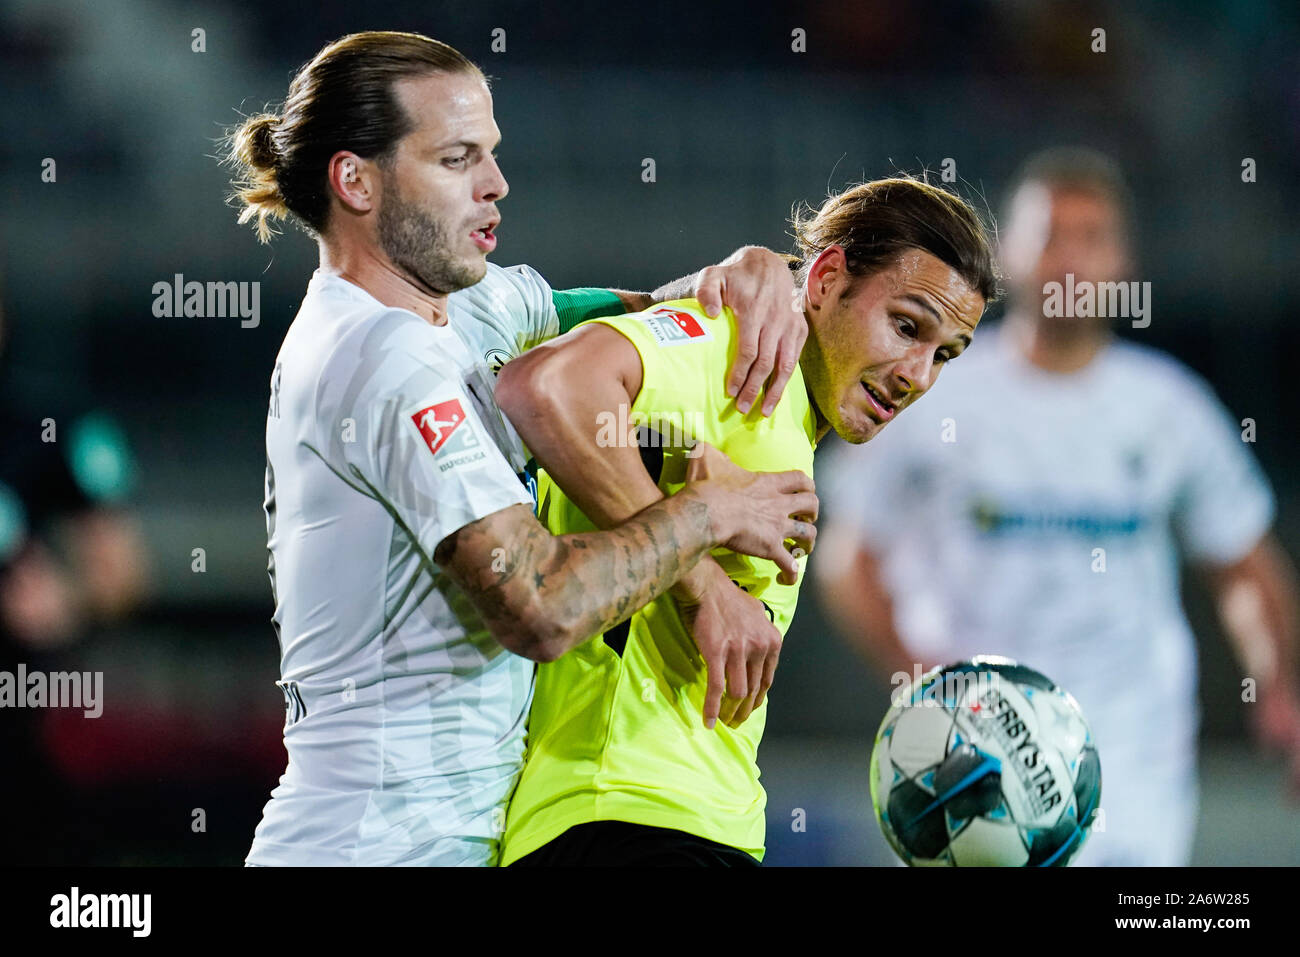 28 October 2019, Baden-Wuerttemberg, Sandhausen: Soccer: 2nd Bundesliga, SV Sandhausen - SV Wehen Wiesbaden, 11th matchday, in the Hardtwaldstadion. Sandhausens Dennis Diekmeier (l) and Wiesbadens Tobias Schwede fight for the ball. Photo: Uwe Anspach/dpa - IMPORTANT NOTE: In accordance with the requirements of the DFL Deutsche Fußball Liga or the DFB Deutscher Fußball-Bund, it is prohibited to use or have used photographs taken in the stadium and/or the match in the form of sequence images and/or video-like photo sequences. Stock Photo